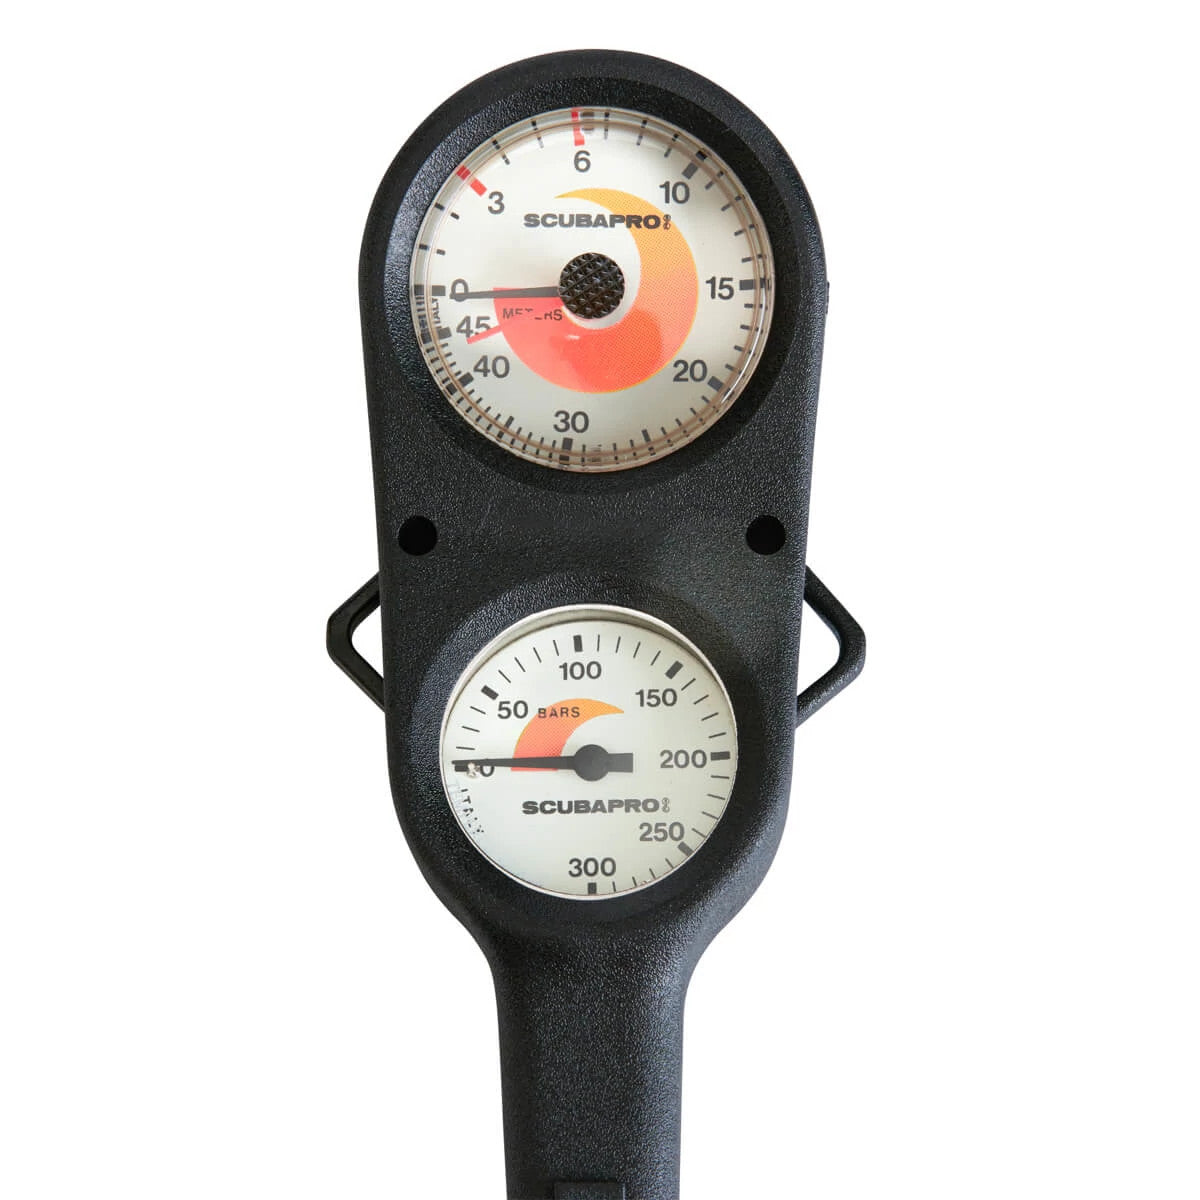 Used ScubaPro Metric Depth And Pressure Gauge Console